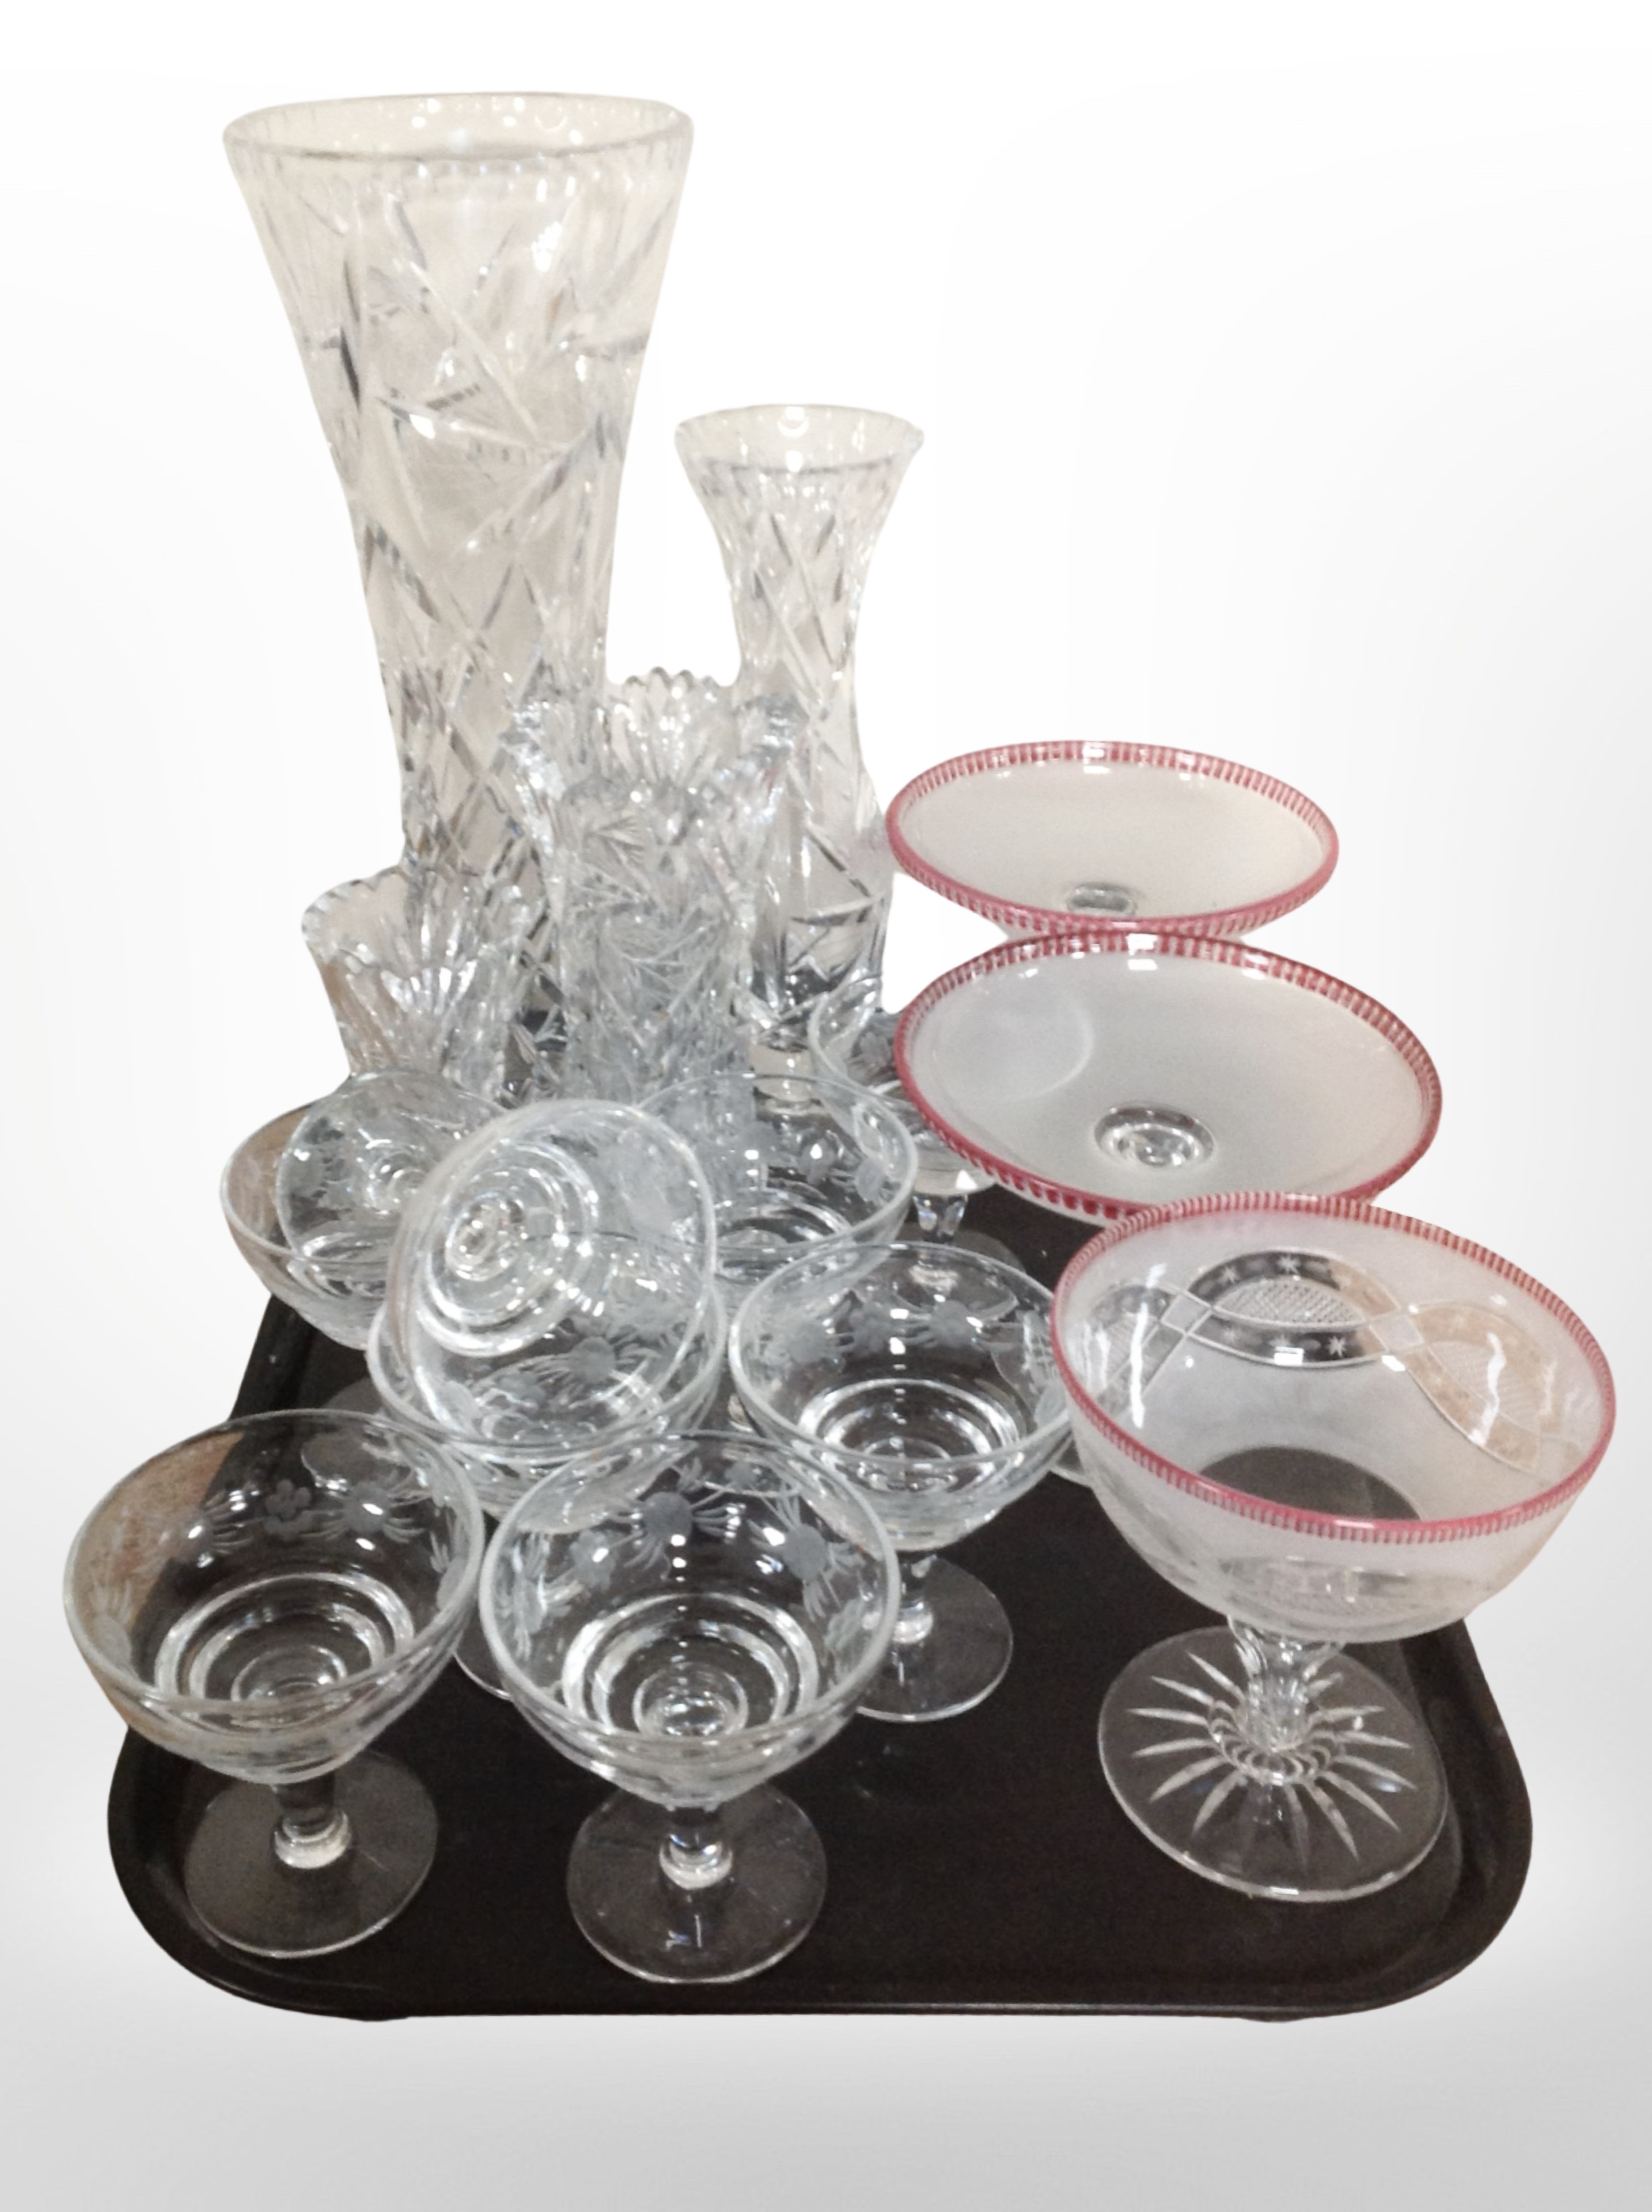 A set of 8 etched crystal glasses, 4 vases, 3 two-tone frosted glass pedestal bowls.